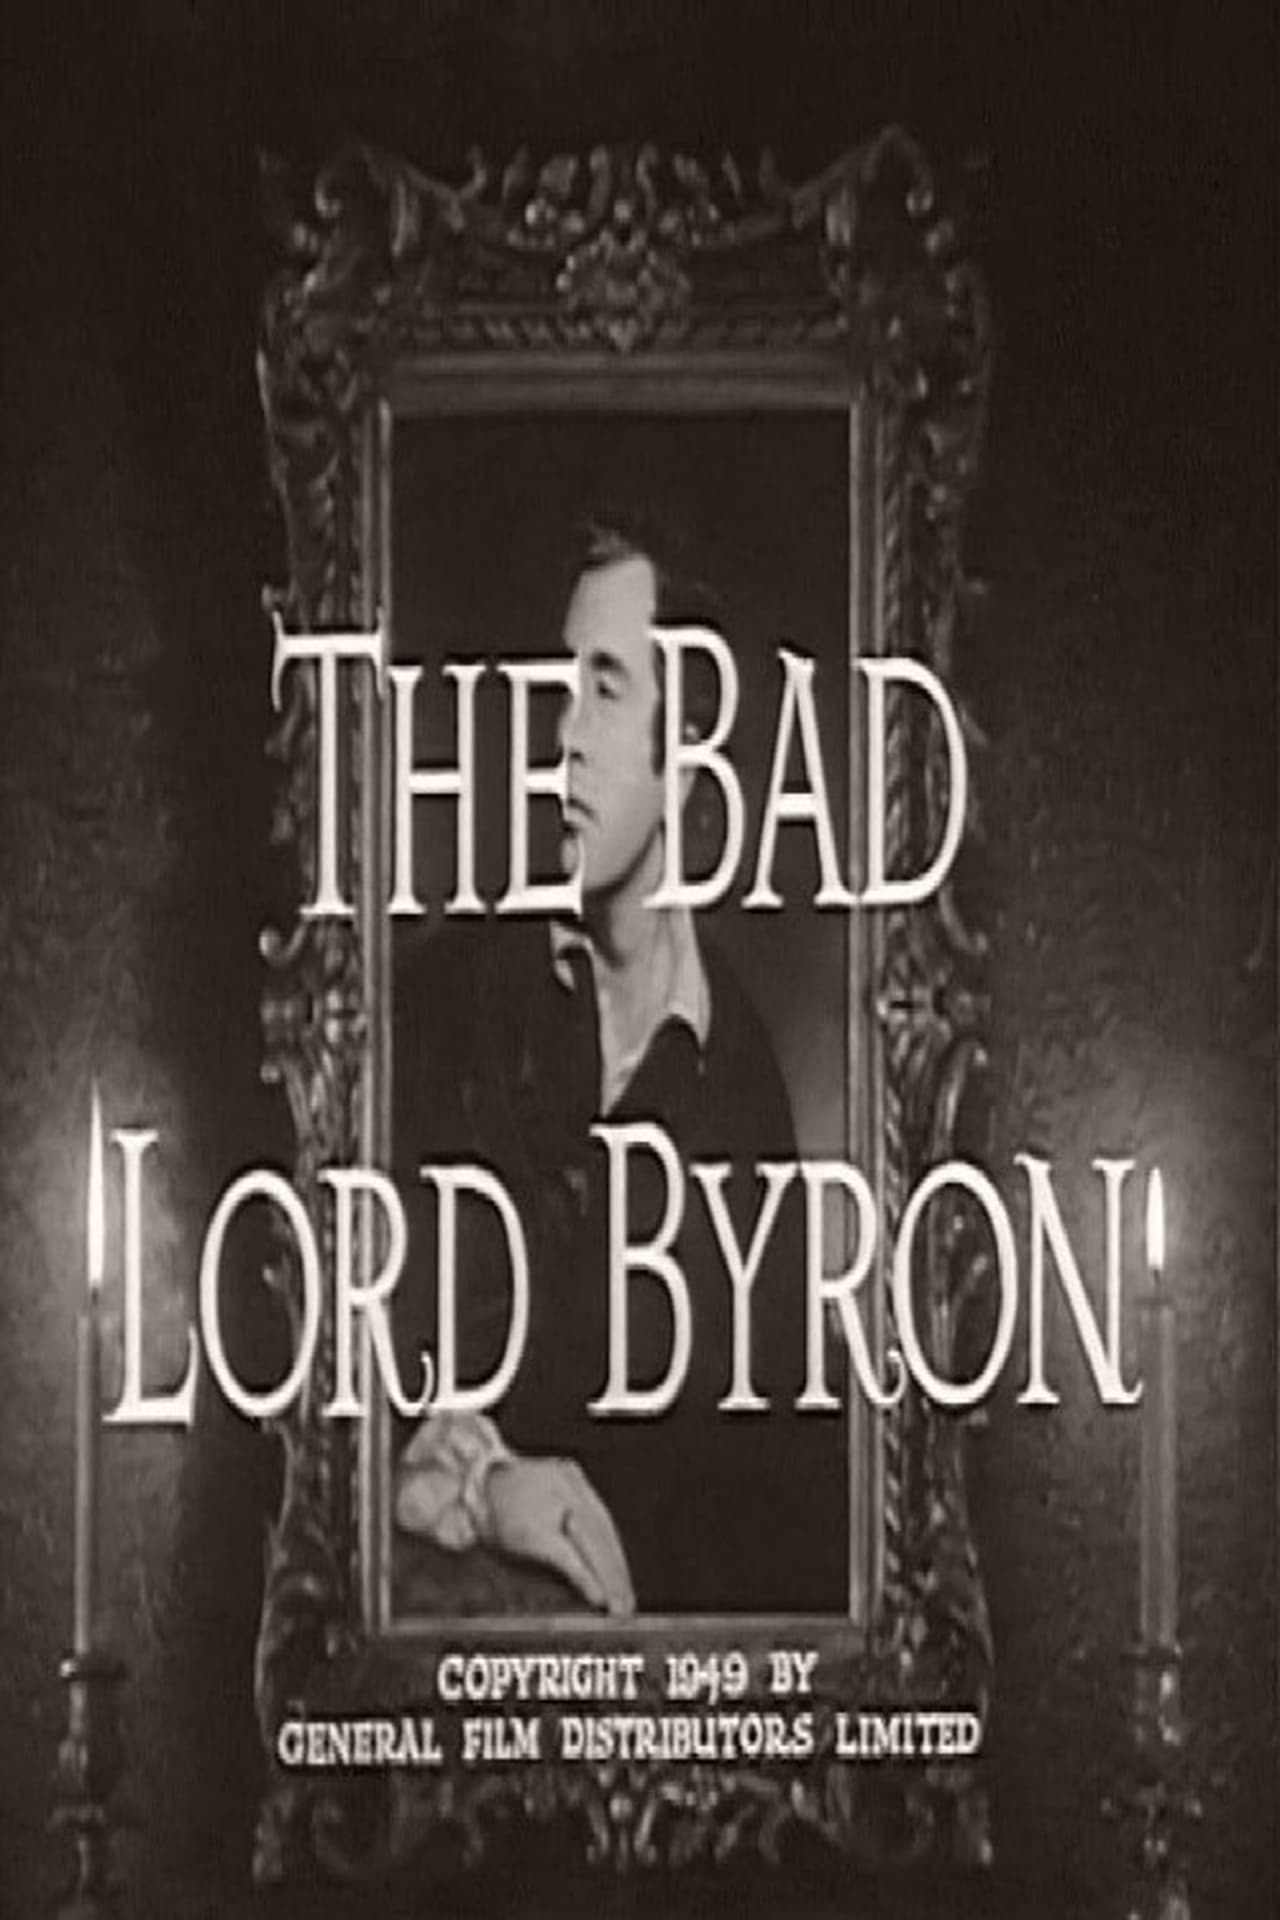 The Bad Lord Byron